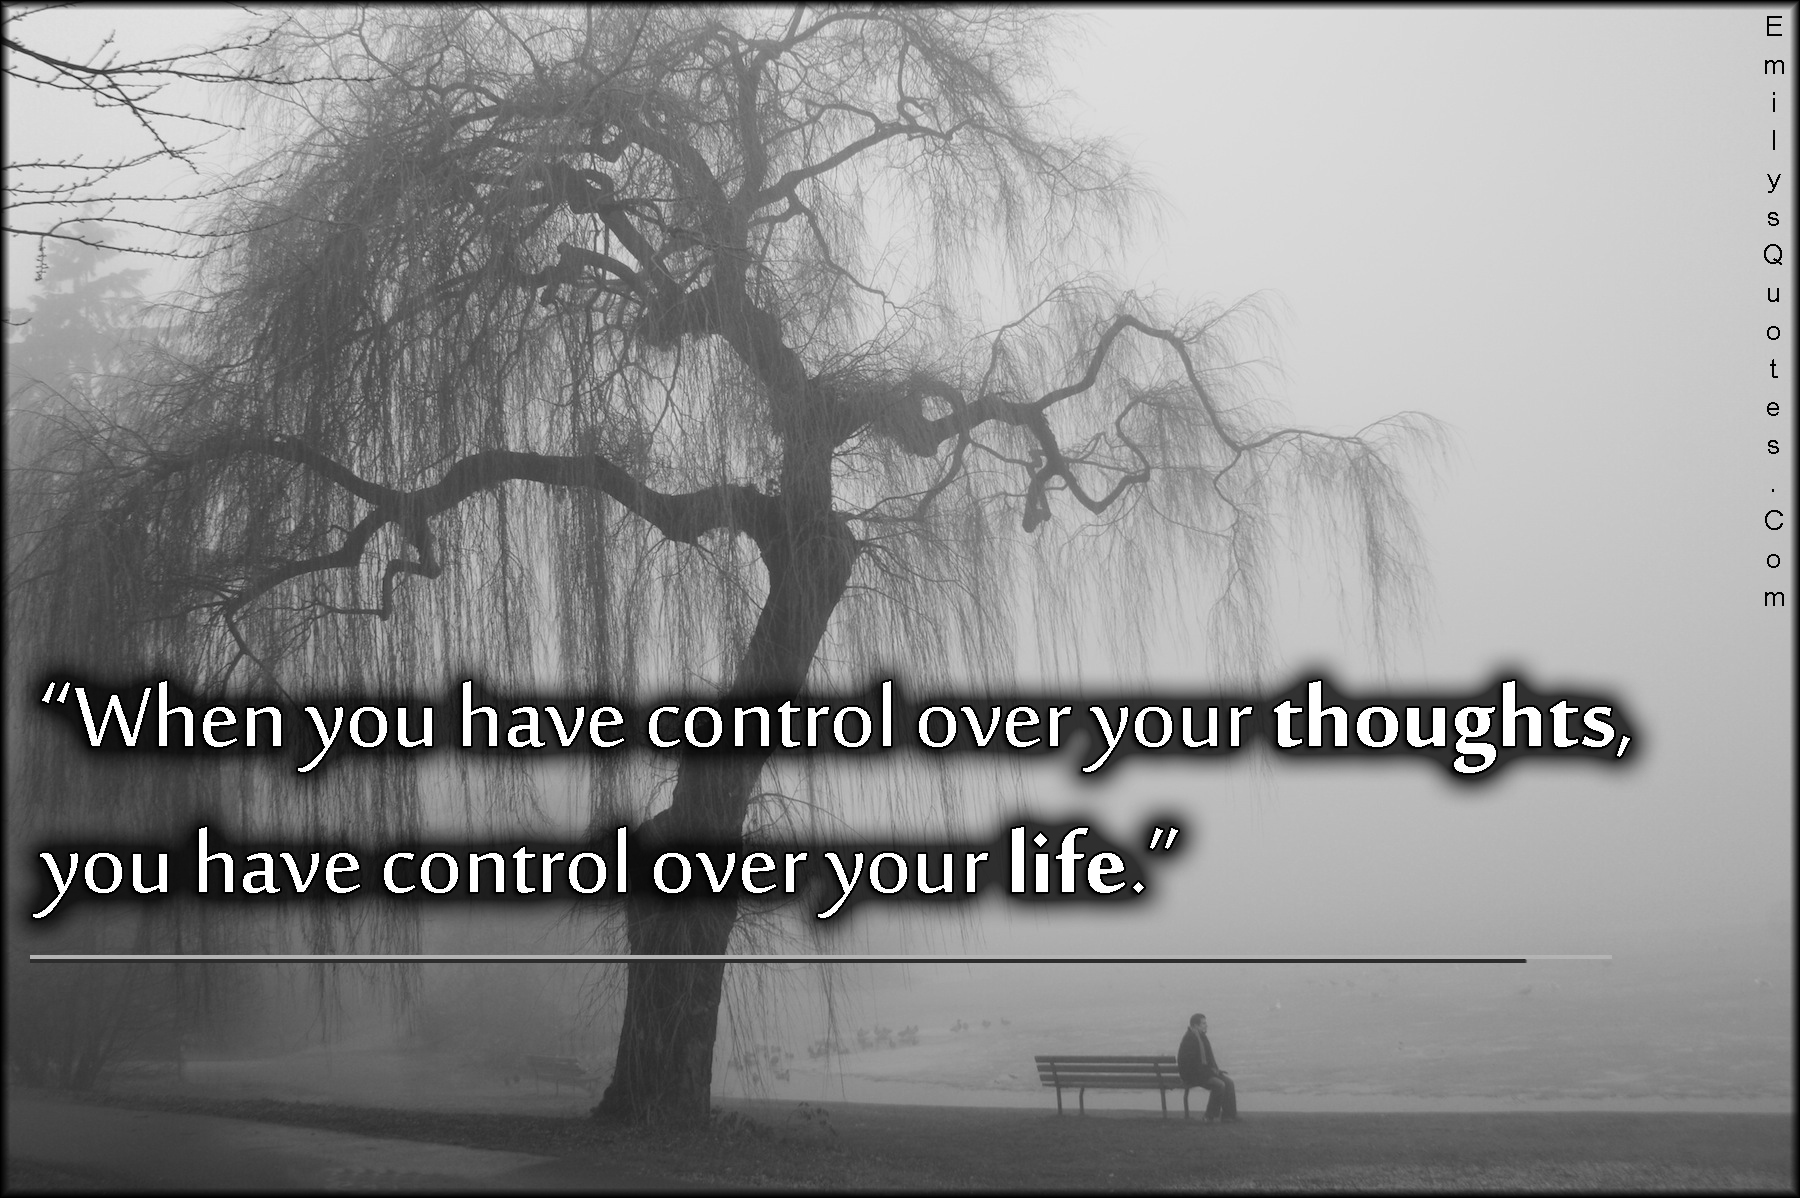 When you have control over your thoughts, you have control over your life